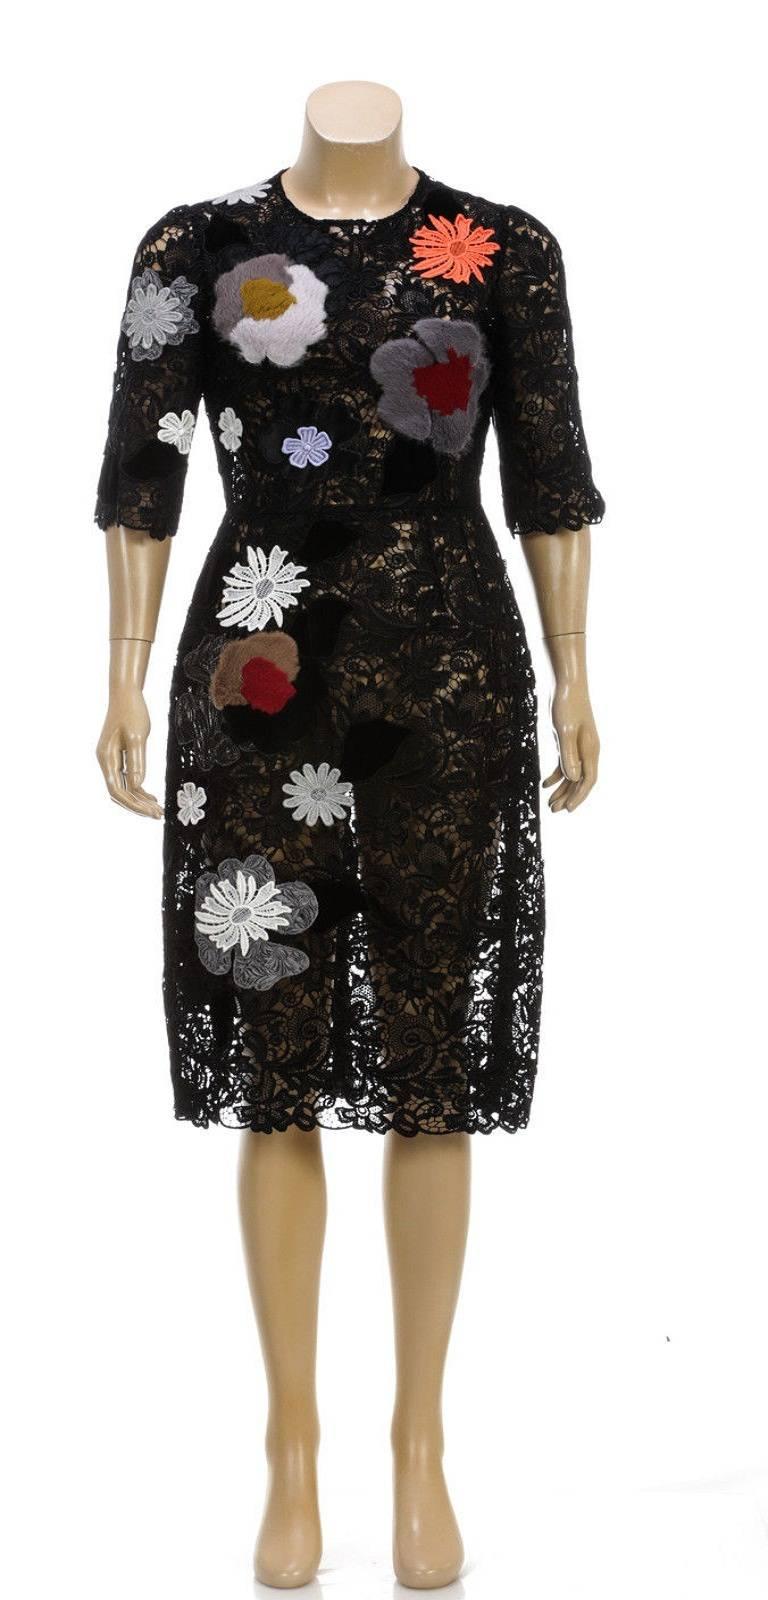 Designer: Dolce & Gabbana
Type: Dress
Condition: Pre-owned in excellent condition
Color: Black Multicolor
Material: 64% Rayon, 32% Cotton, 4% Nylon
Dimensions: Bust: 32